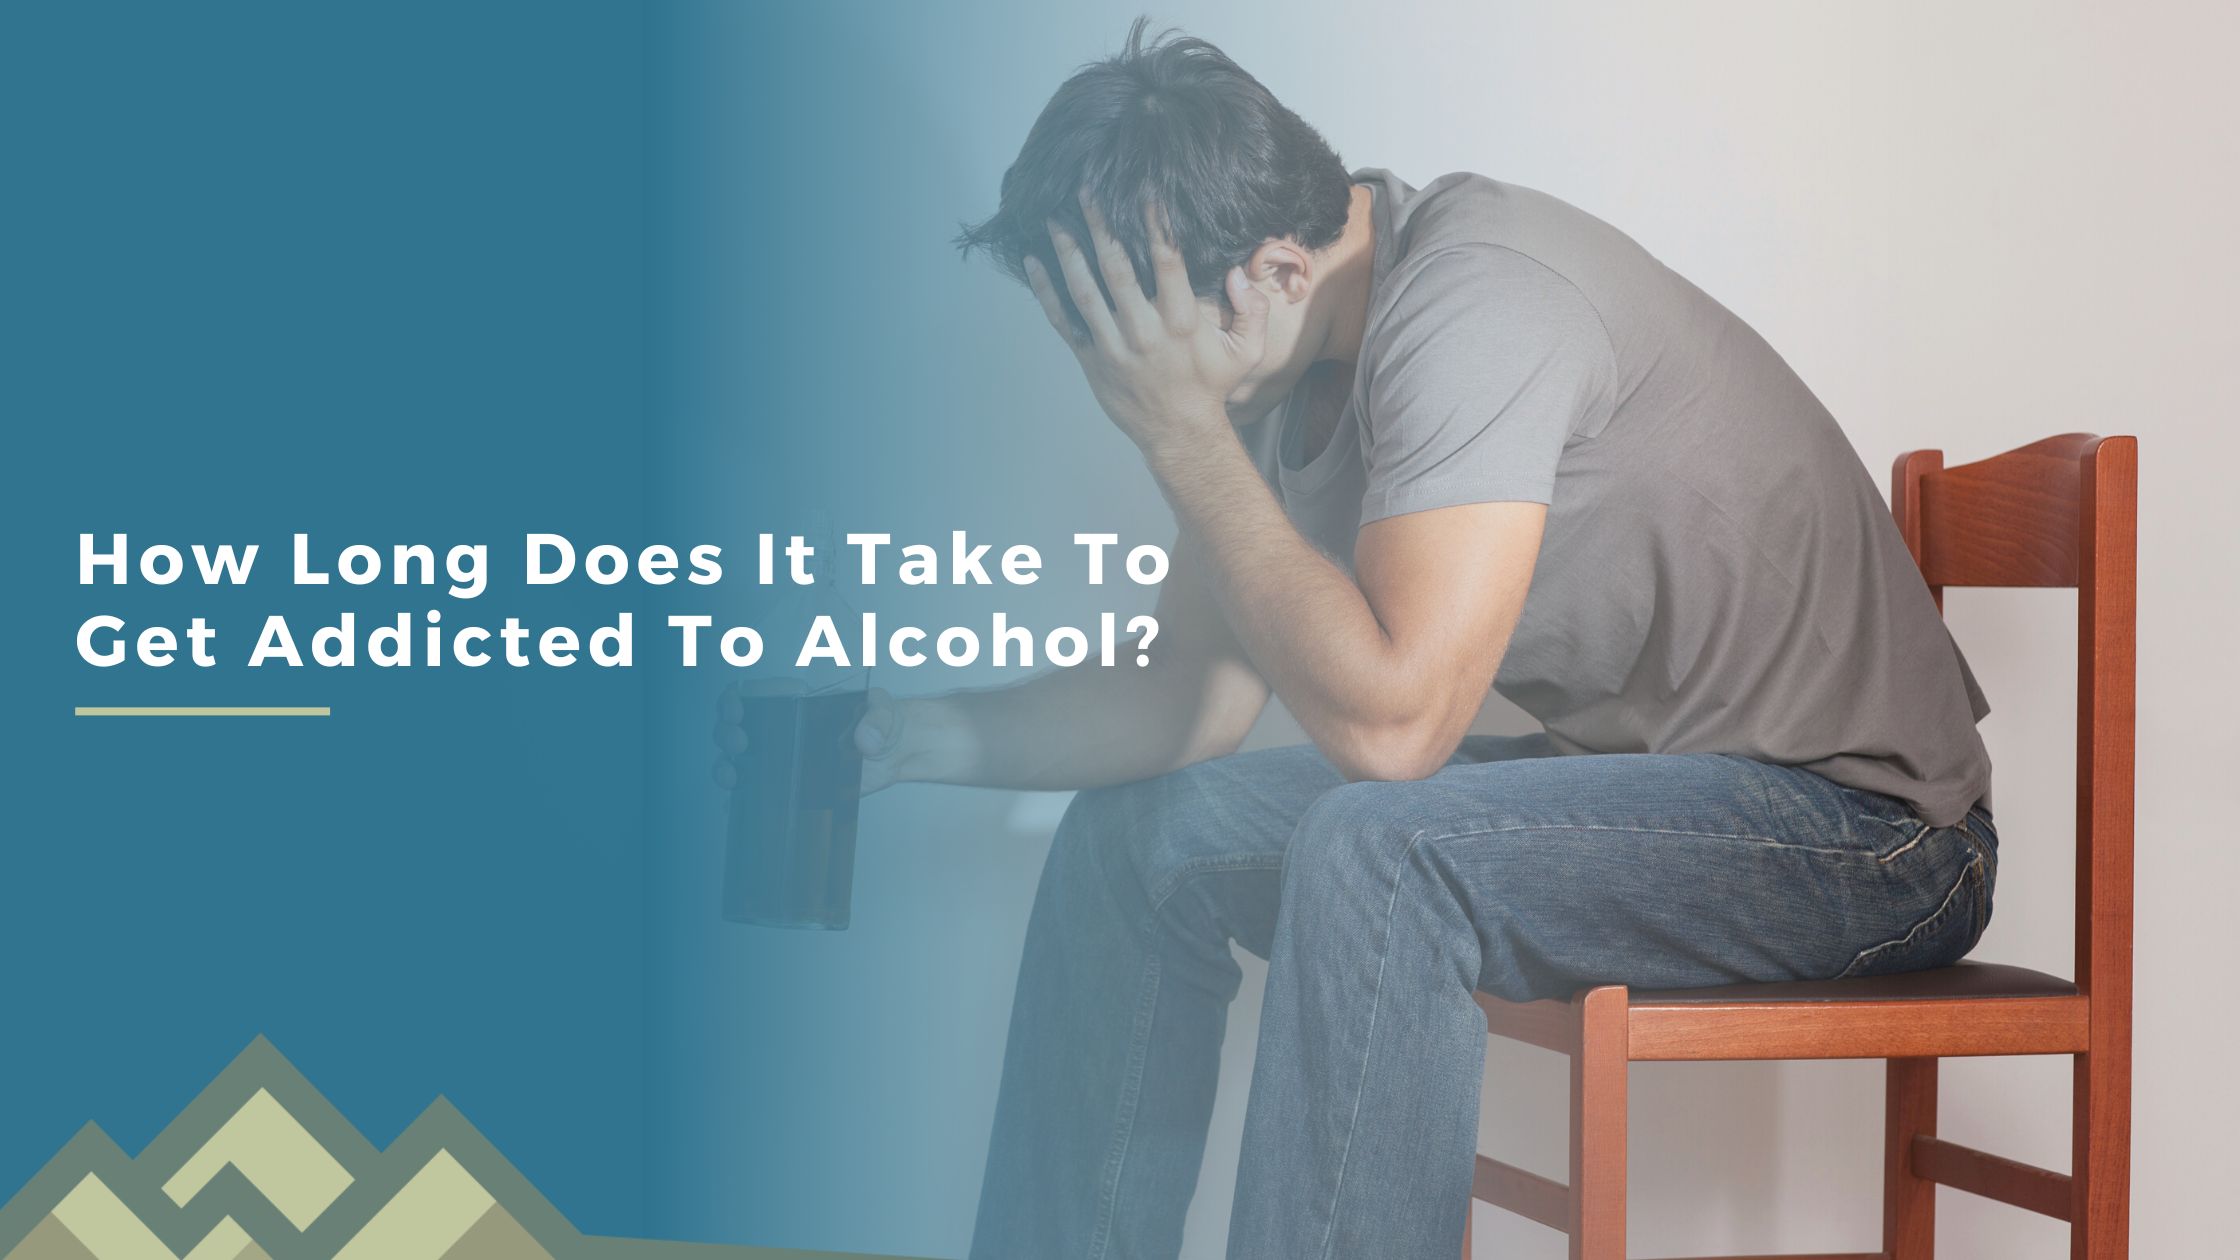 How Long Does It Take To Get Addicted To Alcohol?